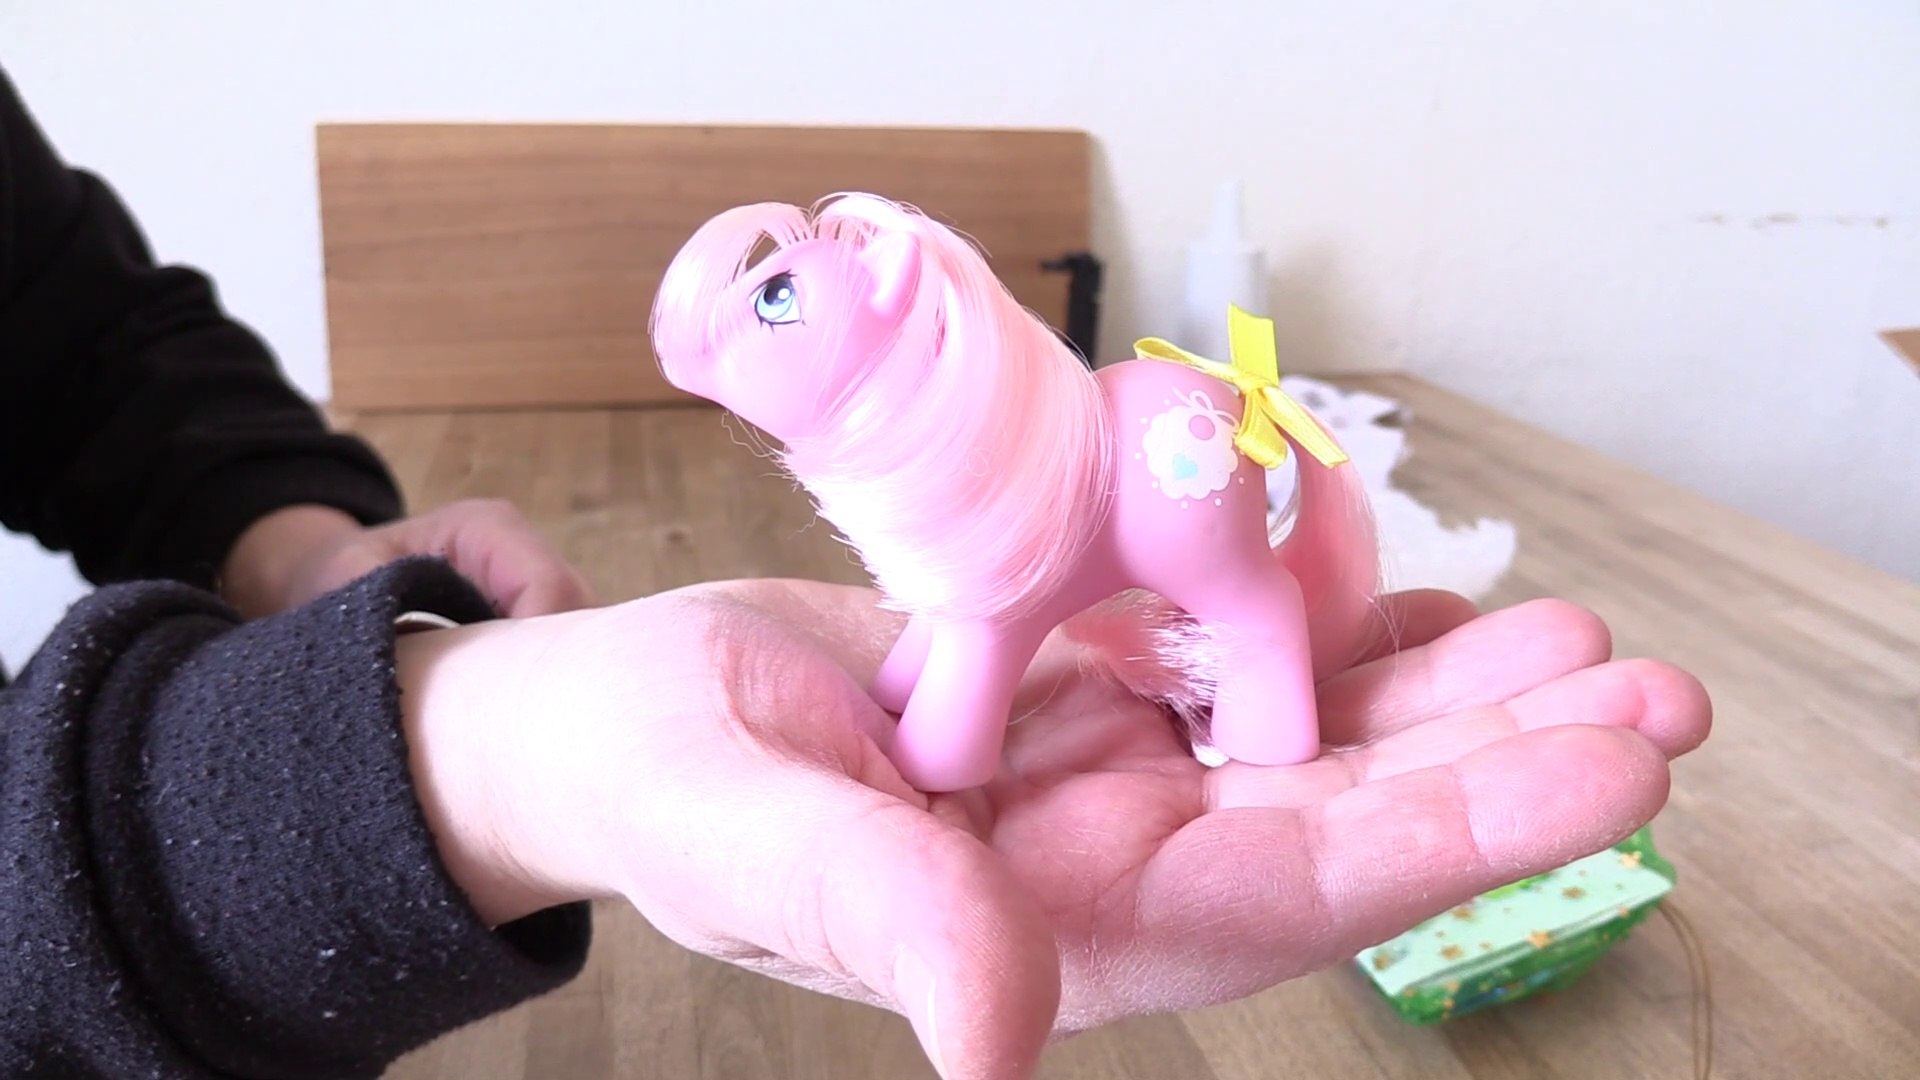 MY LITTLE PONY-UNBOXING PONY POST BABY TIDDLEY WINKS